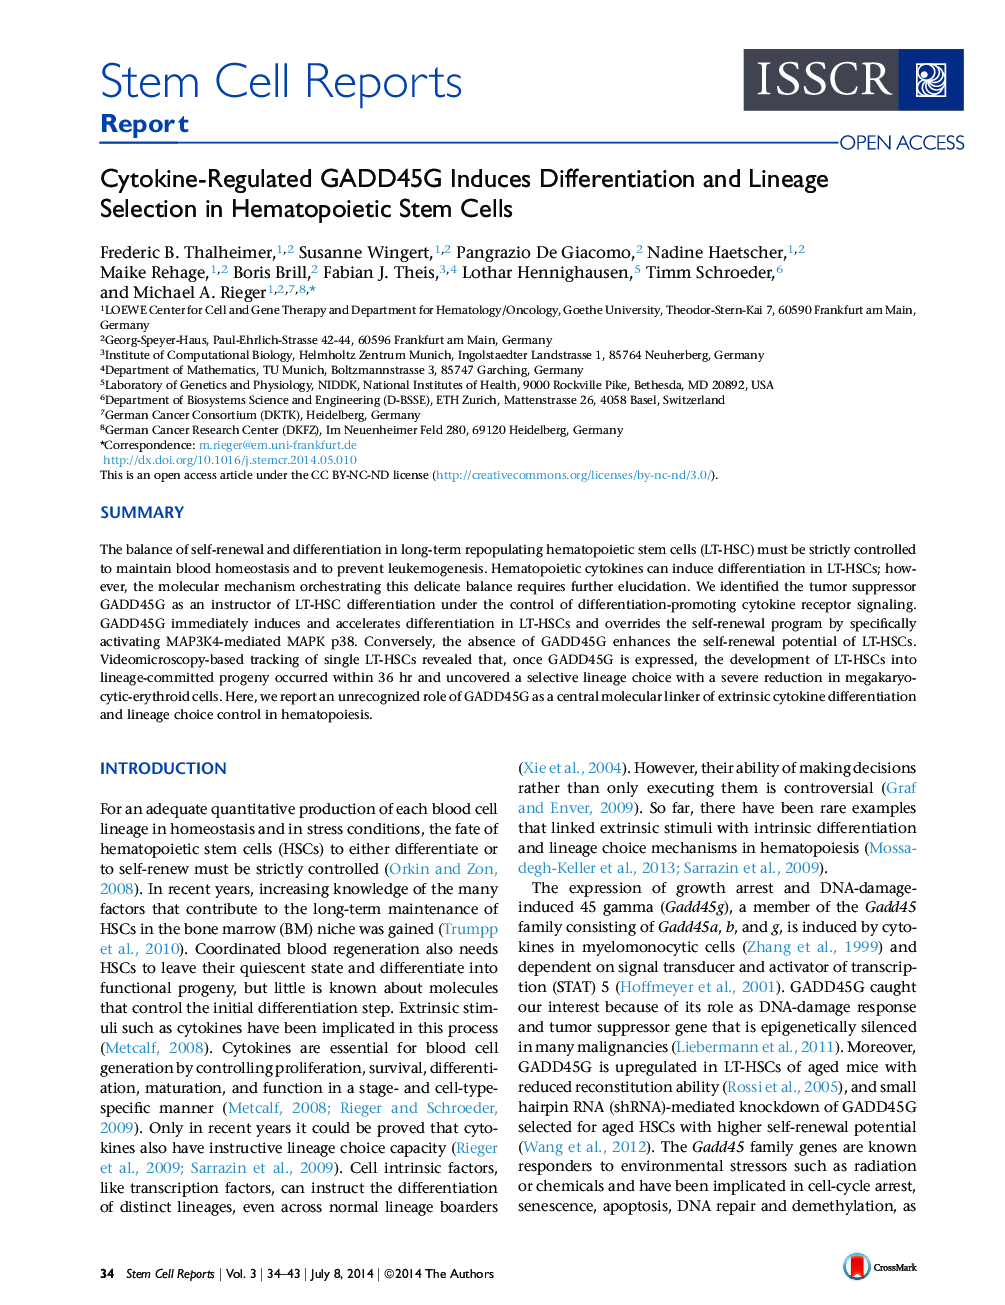 Cytokine-Regulated GADD45G Induces Differentiation and Lineage Selection in Hematopoietic Stem Cells 